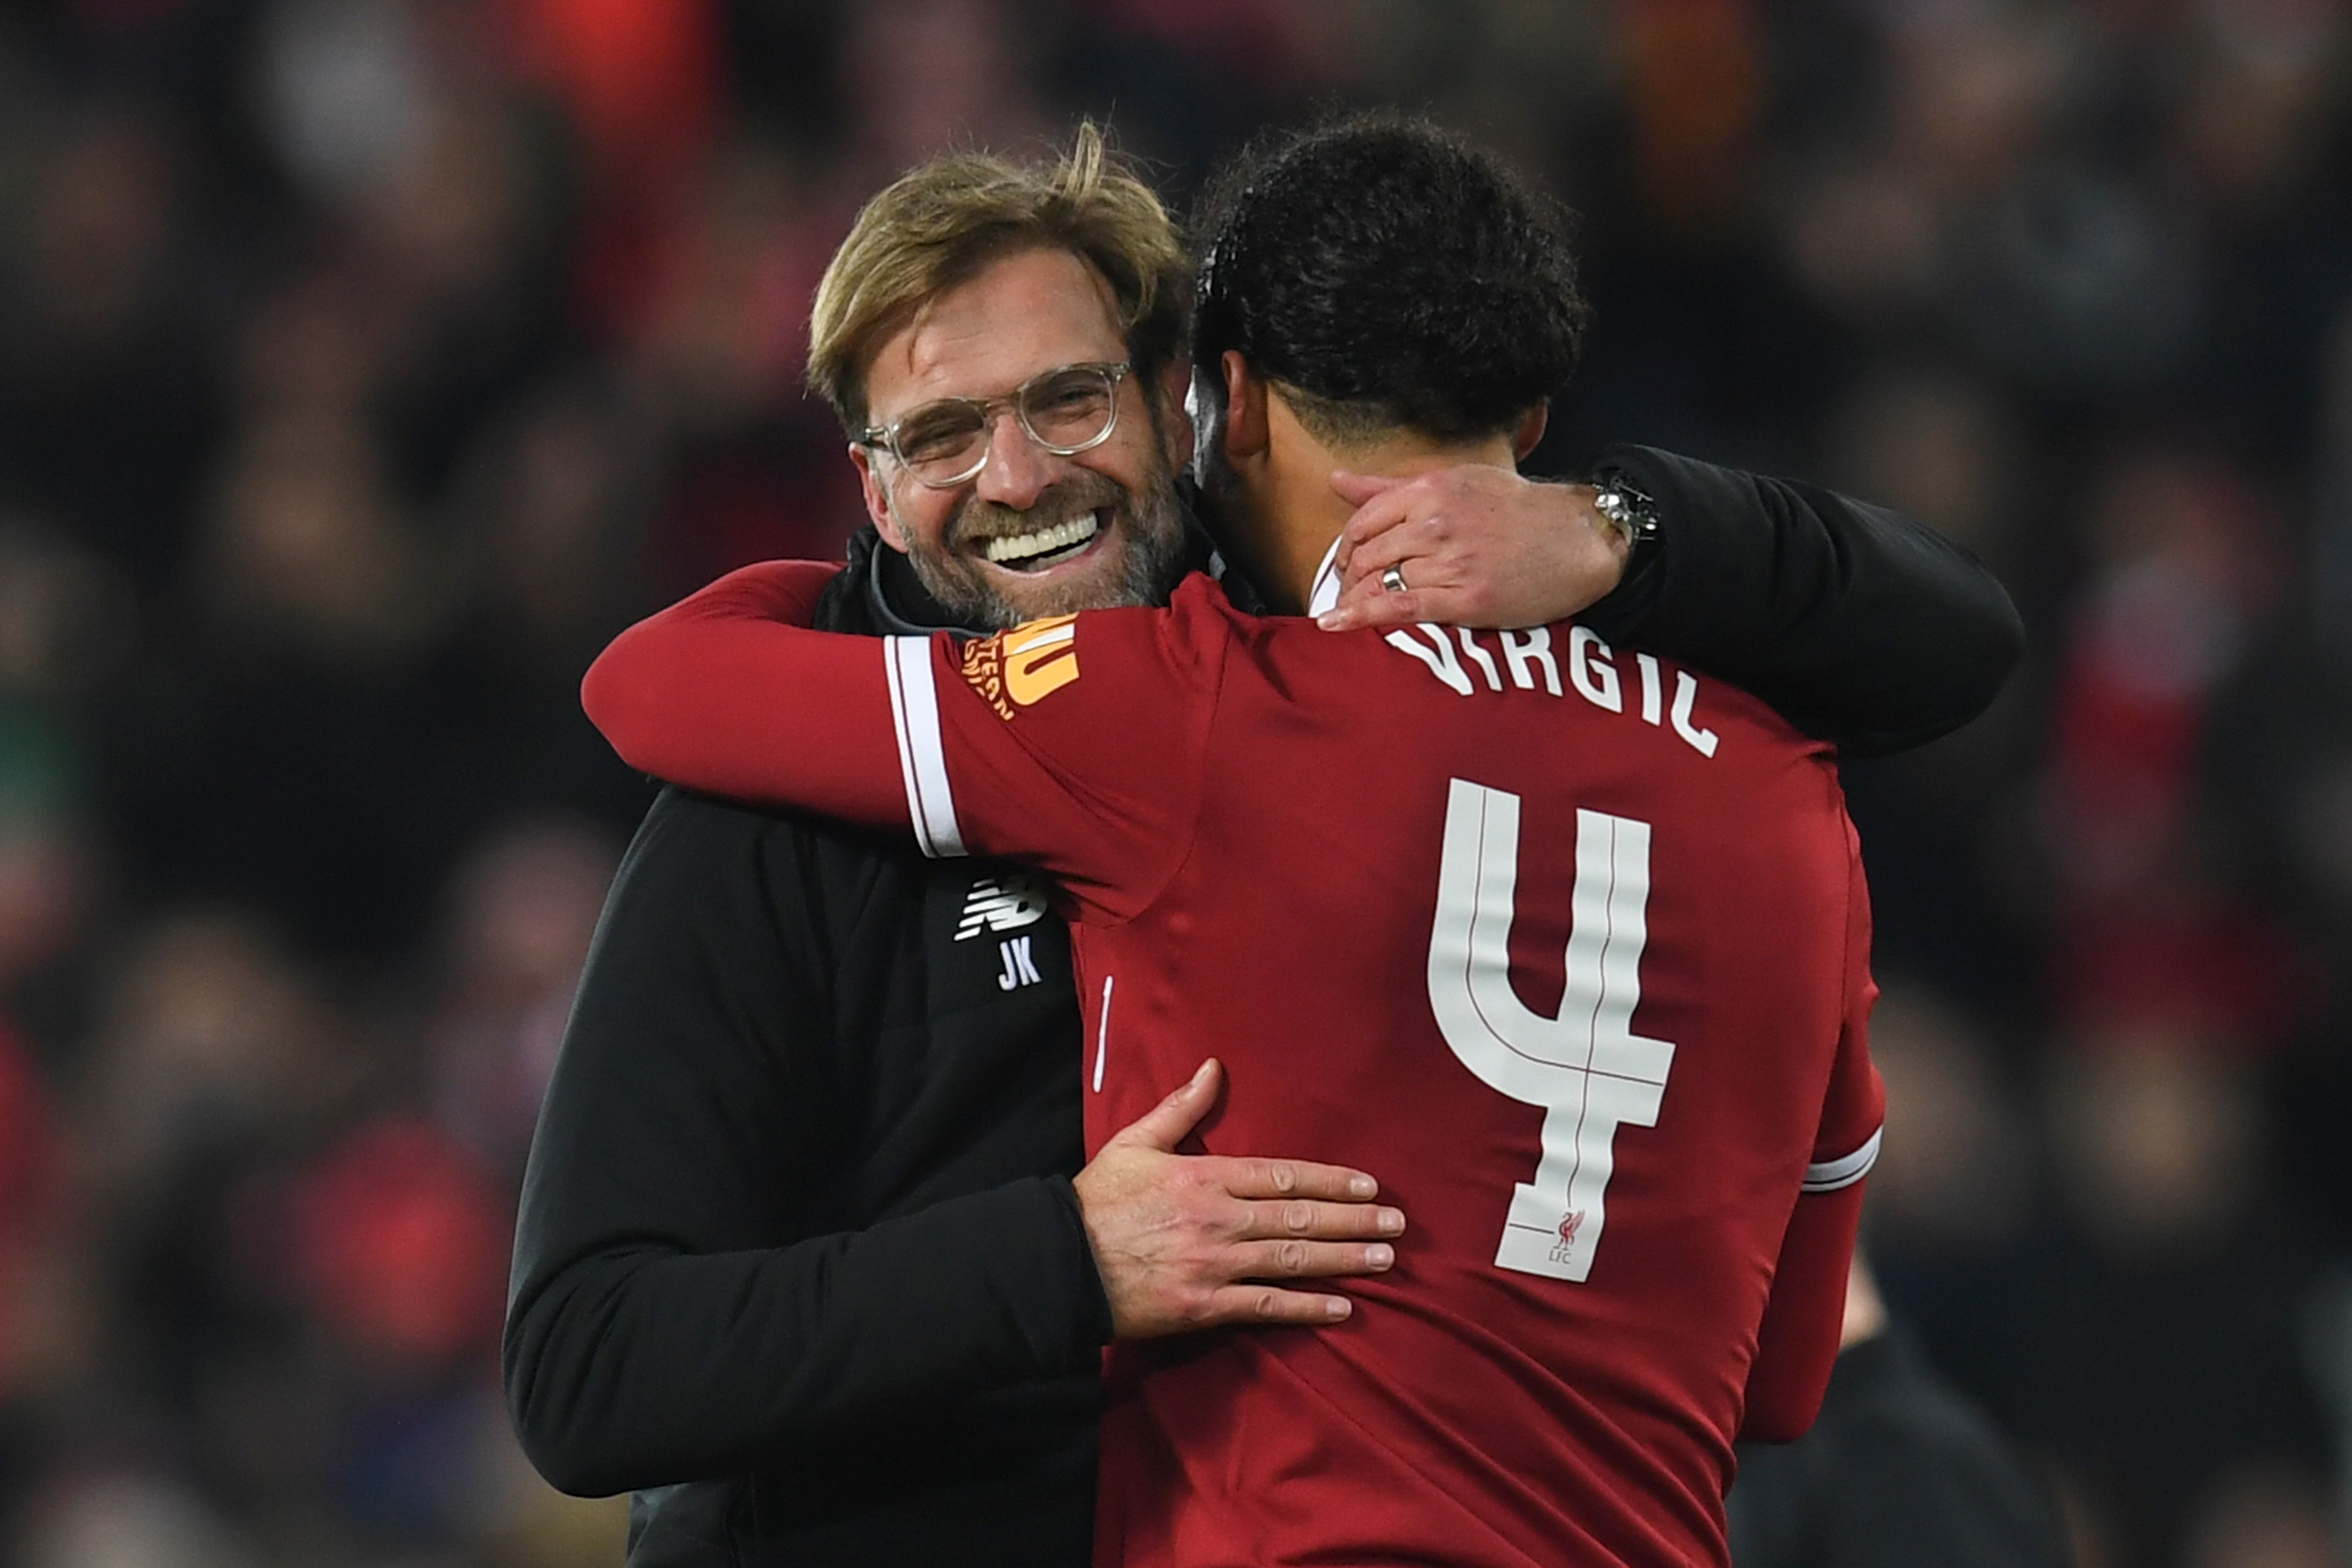 Liverpool's German manager Jurgen Klopp (L) hugs Liverpool's Dutch defender Virgil van Dijk (R) at the end of the English FA Cup third round football match between Liverpool and Everton at Anfield in Liverpool, north west England on January 5, 2018. / AFP PHOTO / Paul ELLIS / RESTRICTED TO EDITORIAL USE. No use with unauthorized audio, video, data, fixture lists, club/league logos or 'live' services. Online in-match use limited to 75 images, no video emulation. No use in betting, games or single club/league/player publications.  /         (Photo credit should read PAUL ELLIS/AFP/Getty Images)